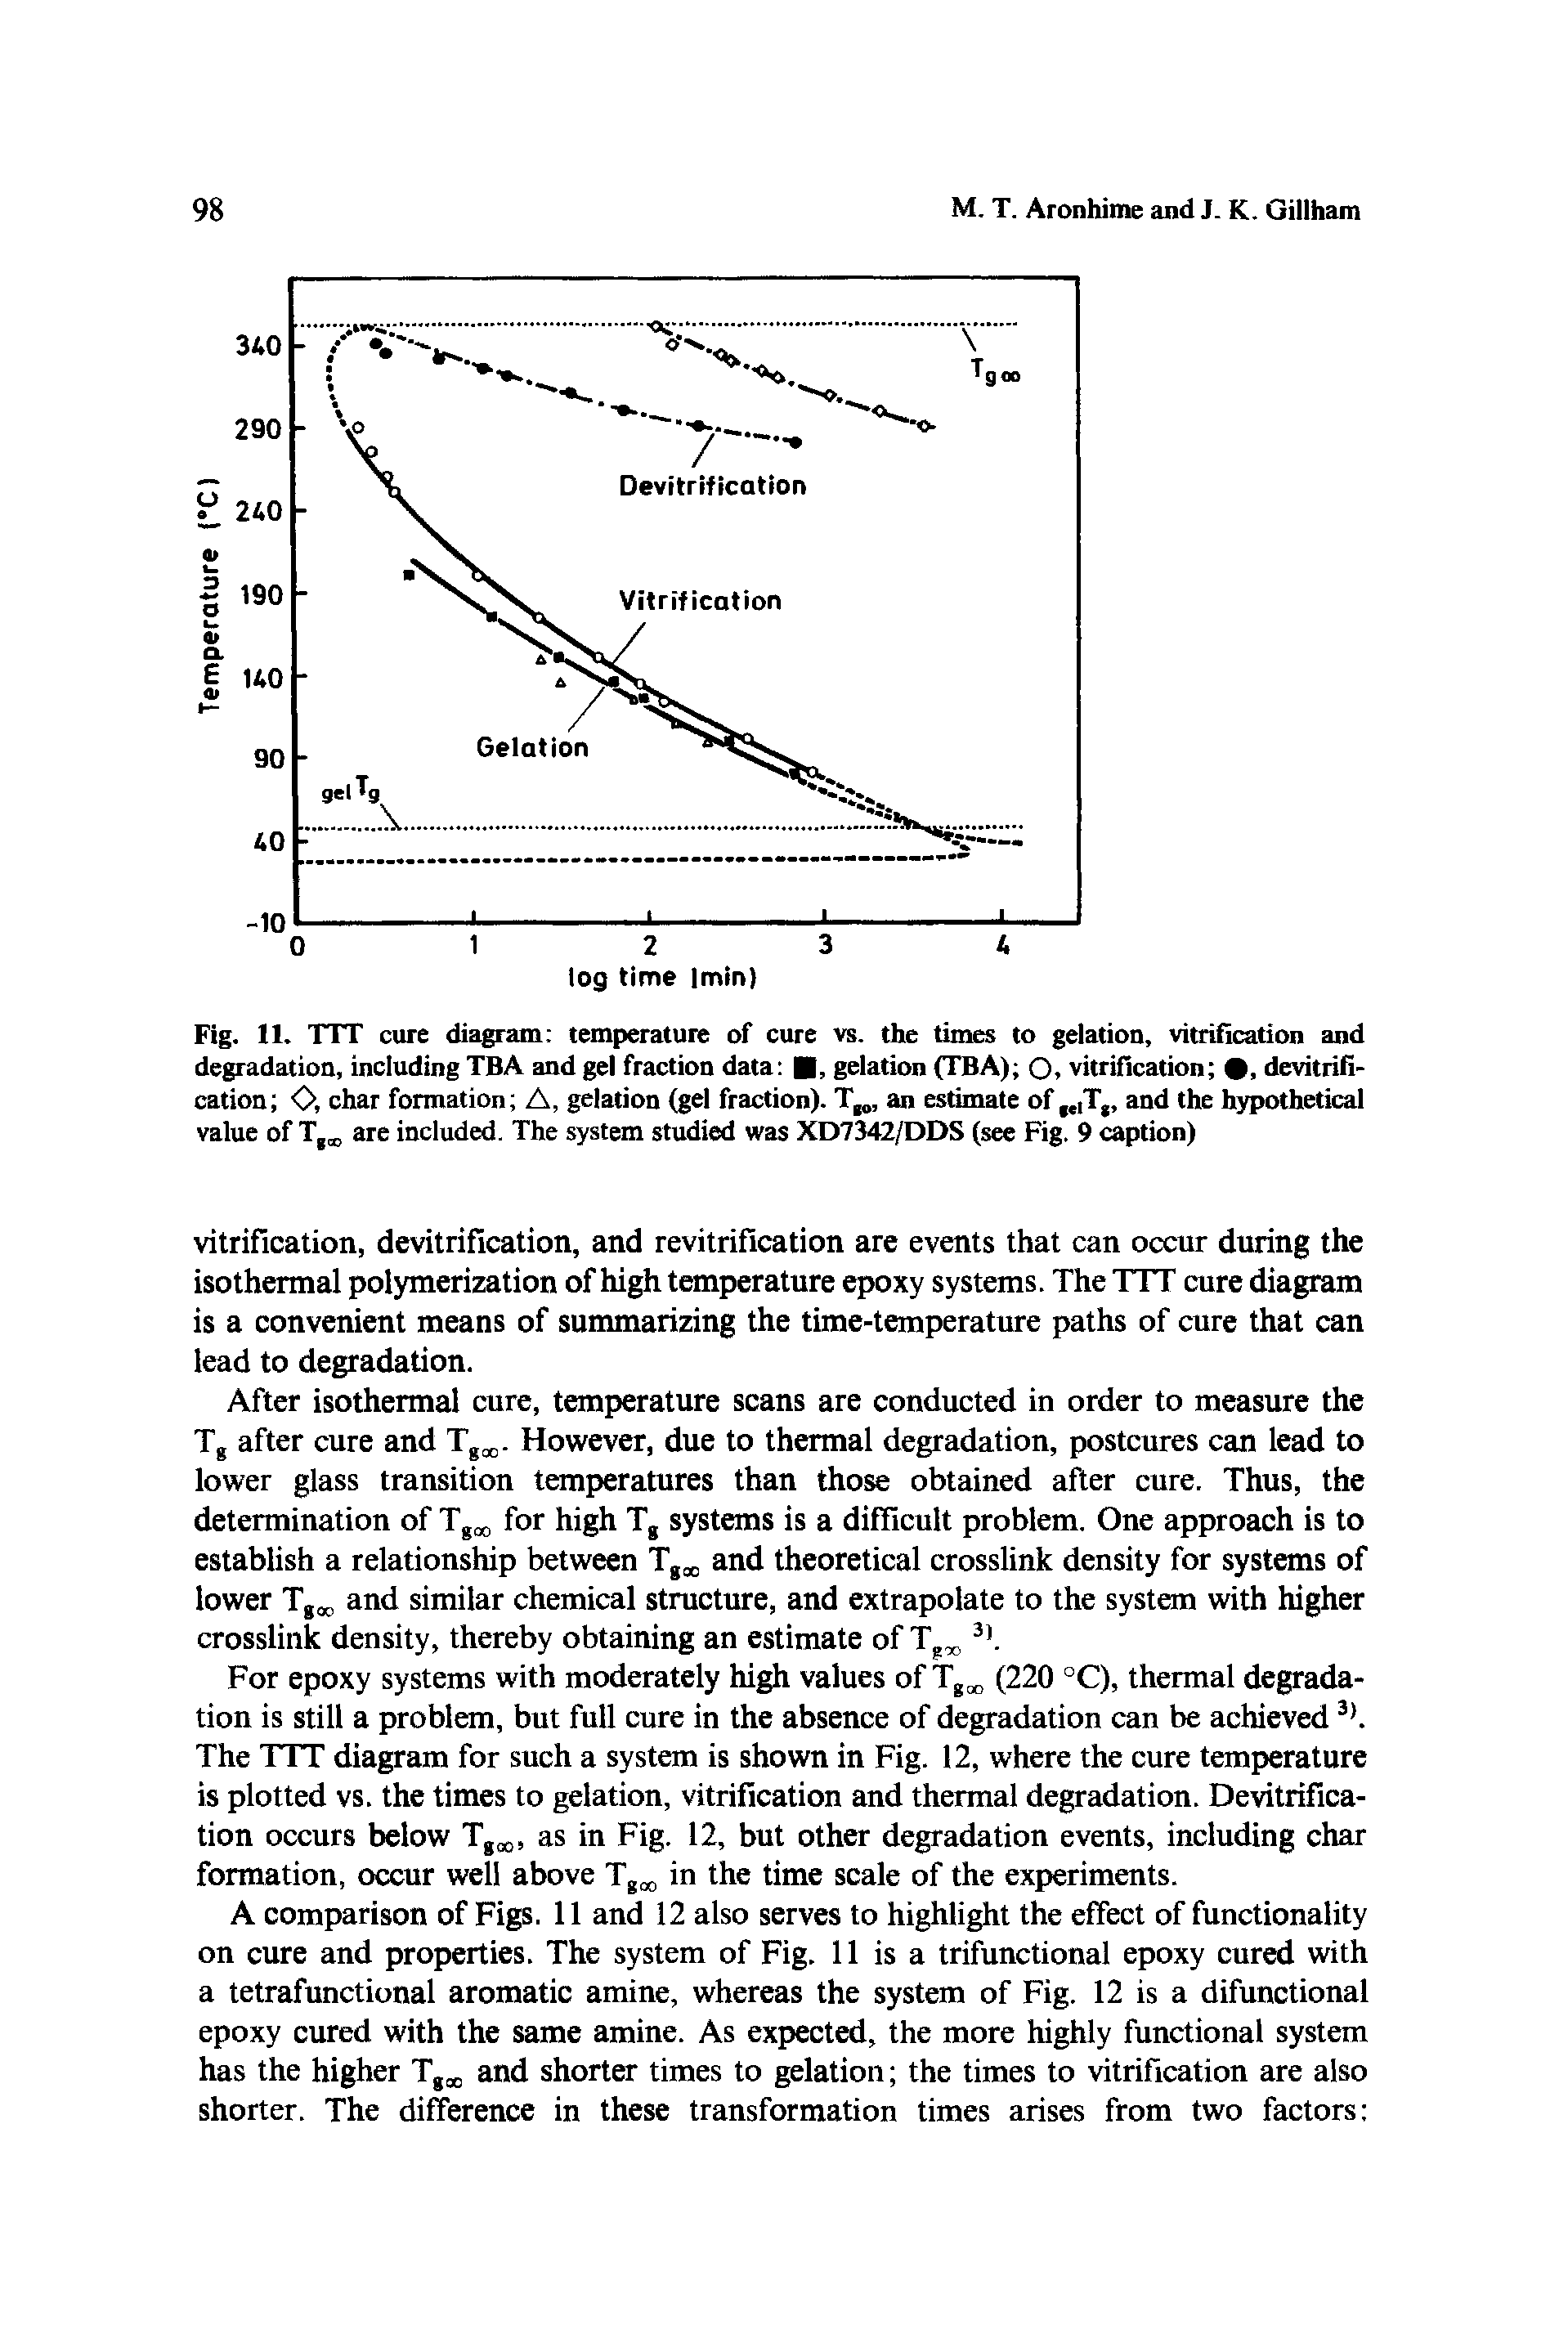 Fig. 11. TIT cure diagram temperature of cure vs. the times to gelation, vitrification and degradation, including TBA and gel fraction data , gelation (TBA) O. vitrification , devitrification O, char formation A, gelation (gel fraction). T, an estimate of and the hypothetical value of T, are included. The system studied was XD7342/DDS (see Fig. 9 caption)...